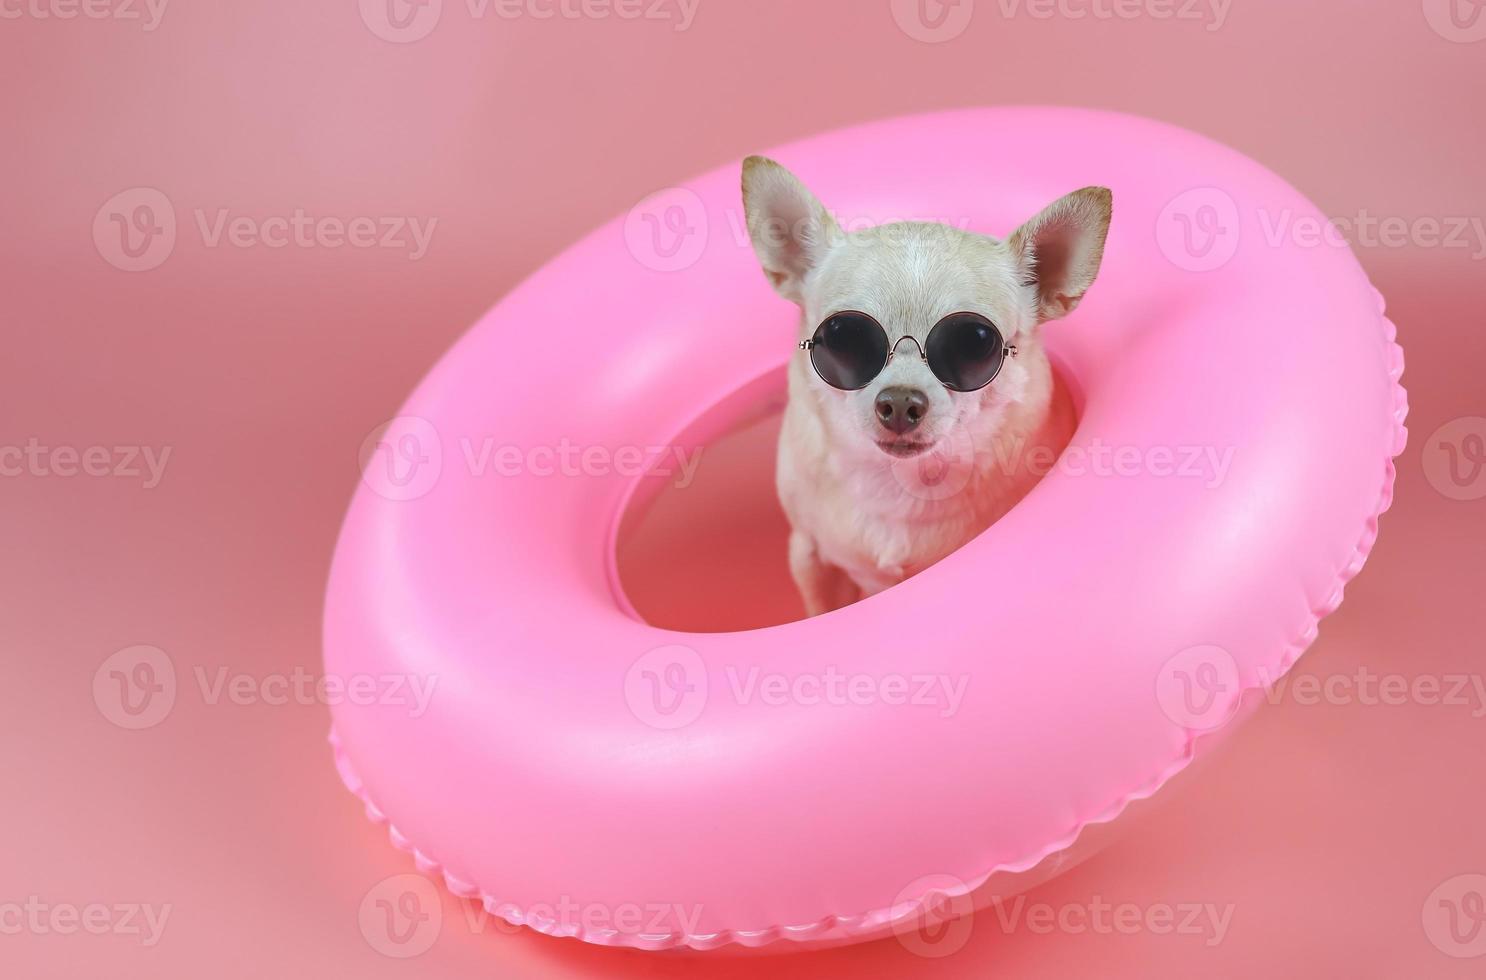 cute brown short hair chihuahua dog wearing sunglasses  sitting  in pink swimming ring, isolated on pink background. photo